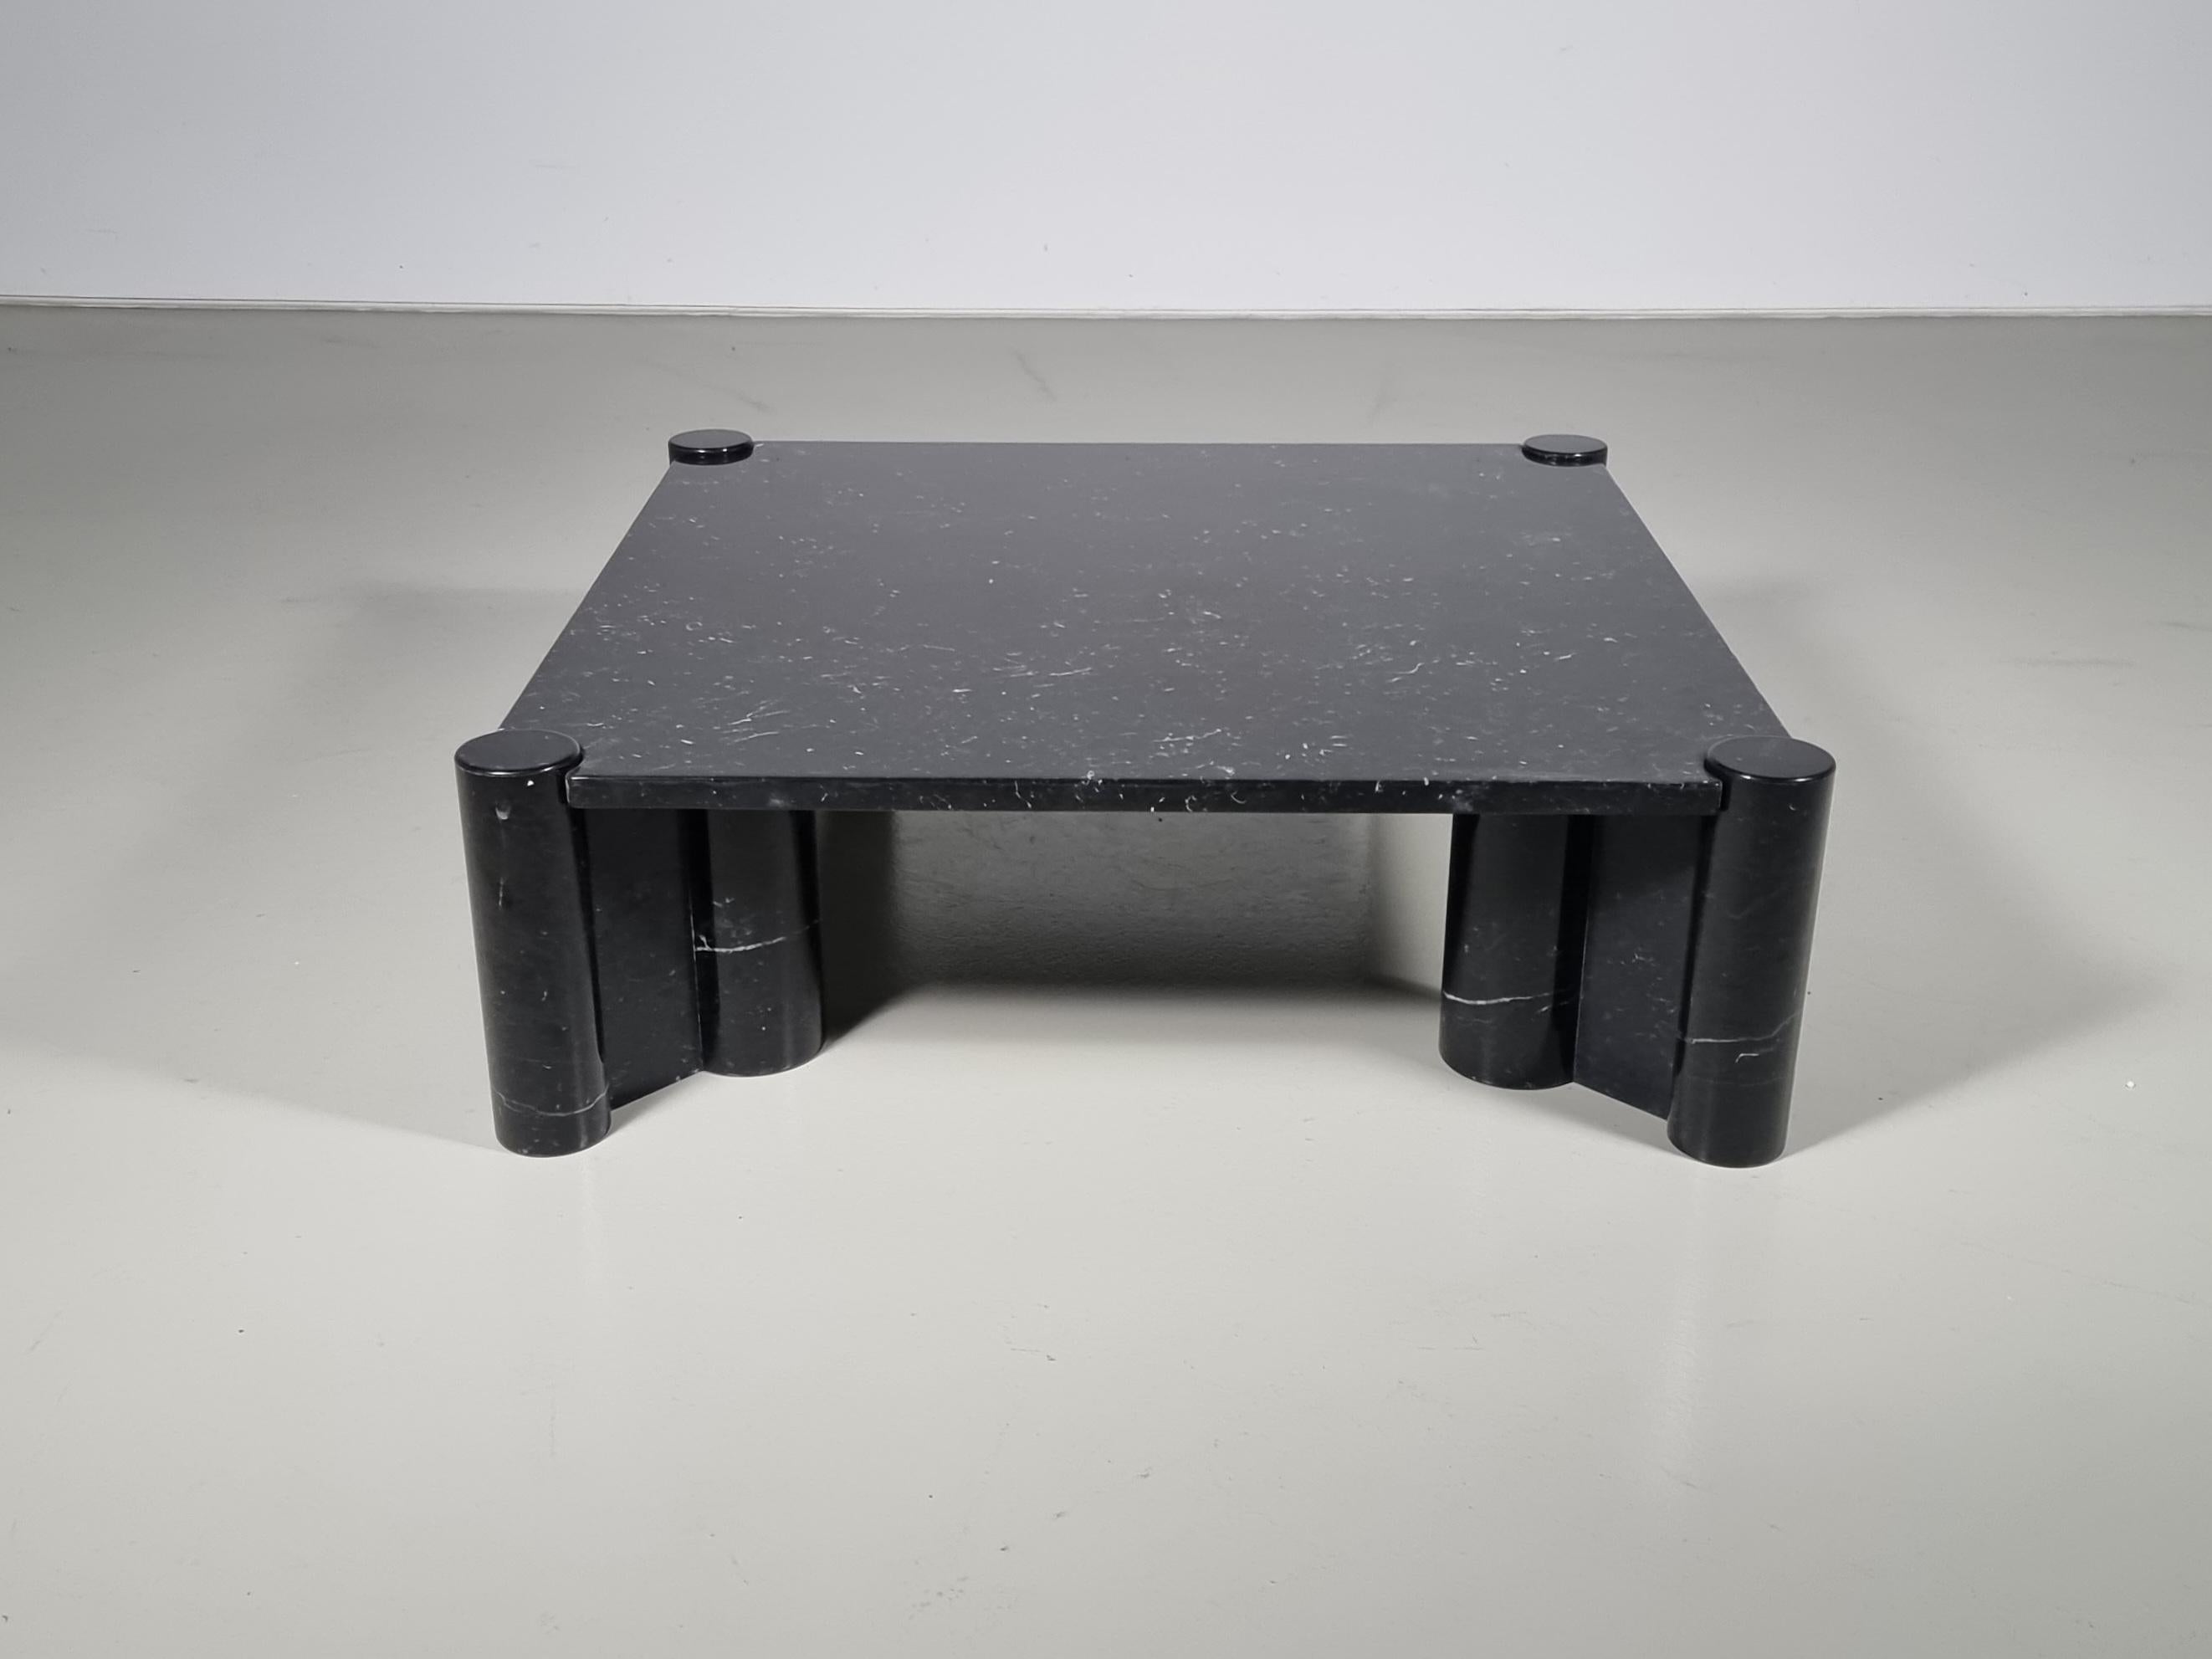 Jumbo coffee table in black Marquina marble, designed by Gae Aulenti for Knoll International in the 1960s. Square table top with four cylindrical cluster legs. Some small signs of use. No damages.

This table would look amazing in any modern home,